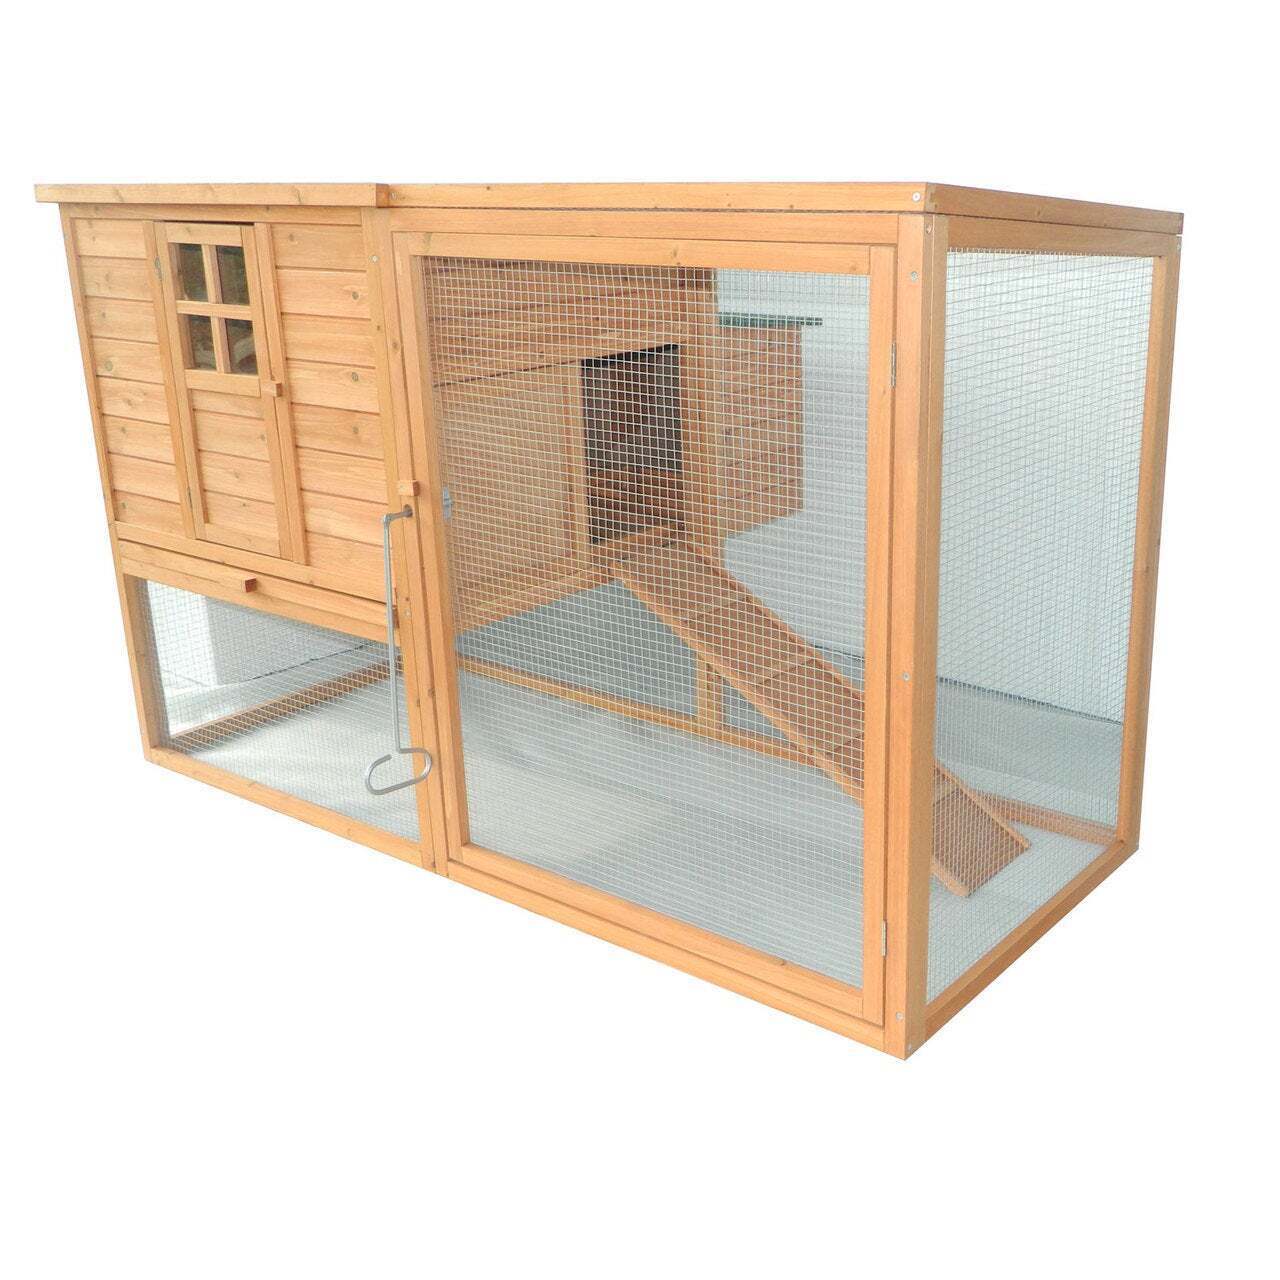 Large Chicken Coop Kits With Open Chicken Run